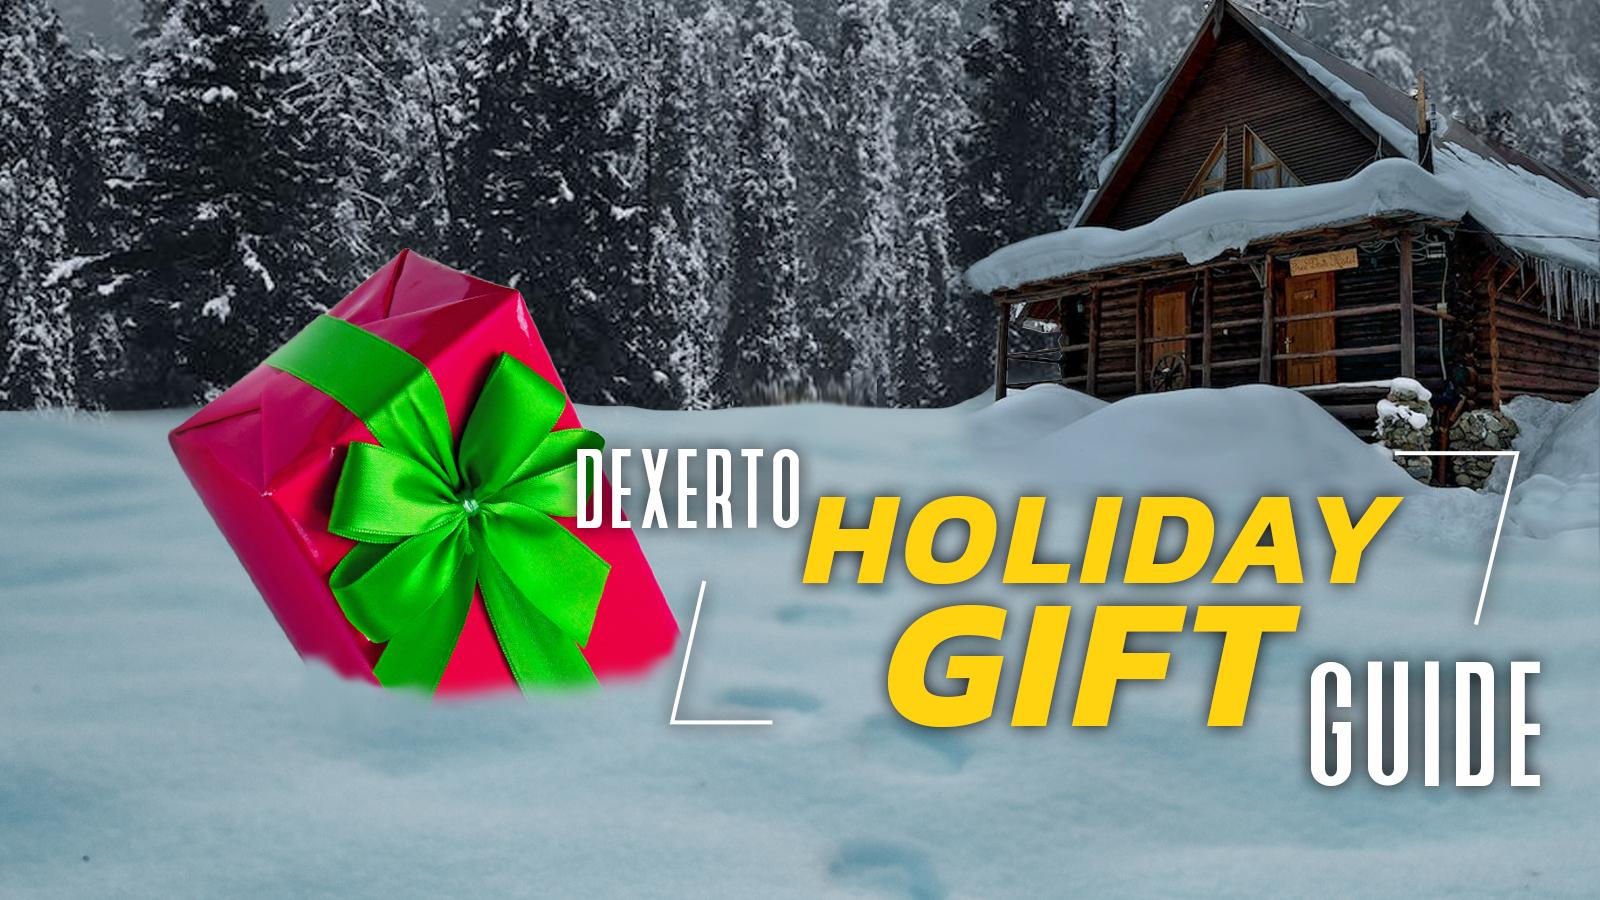 Calling all gamers: Best gift ideas for gamers this holiday season